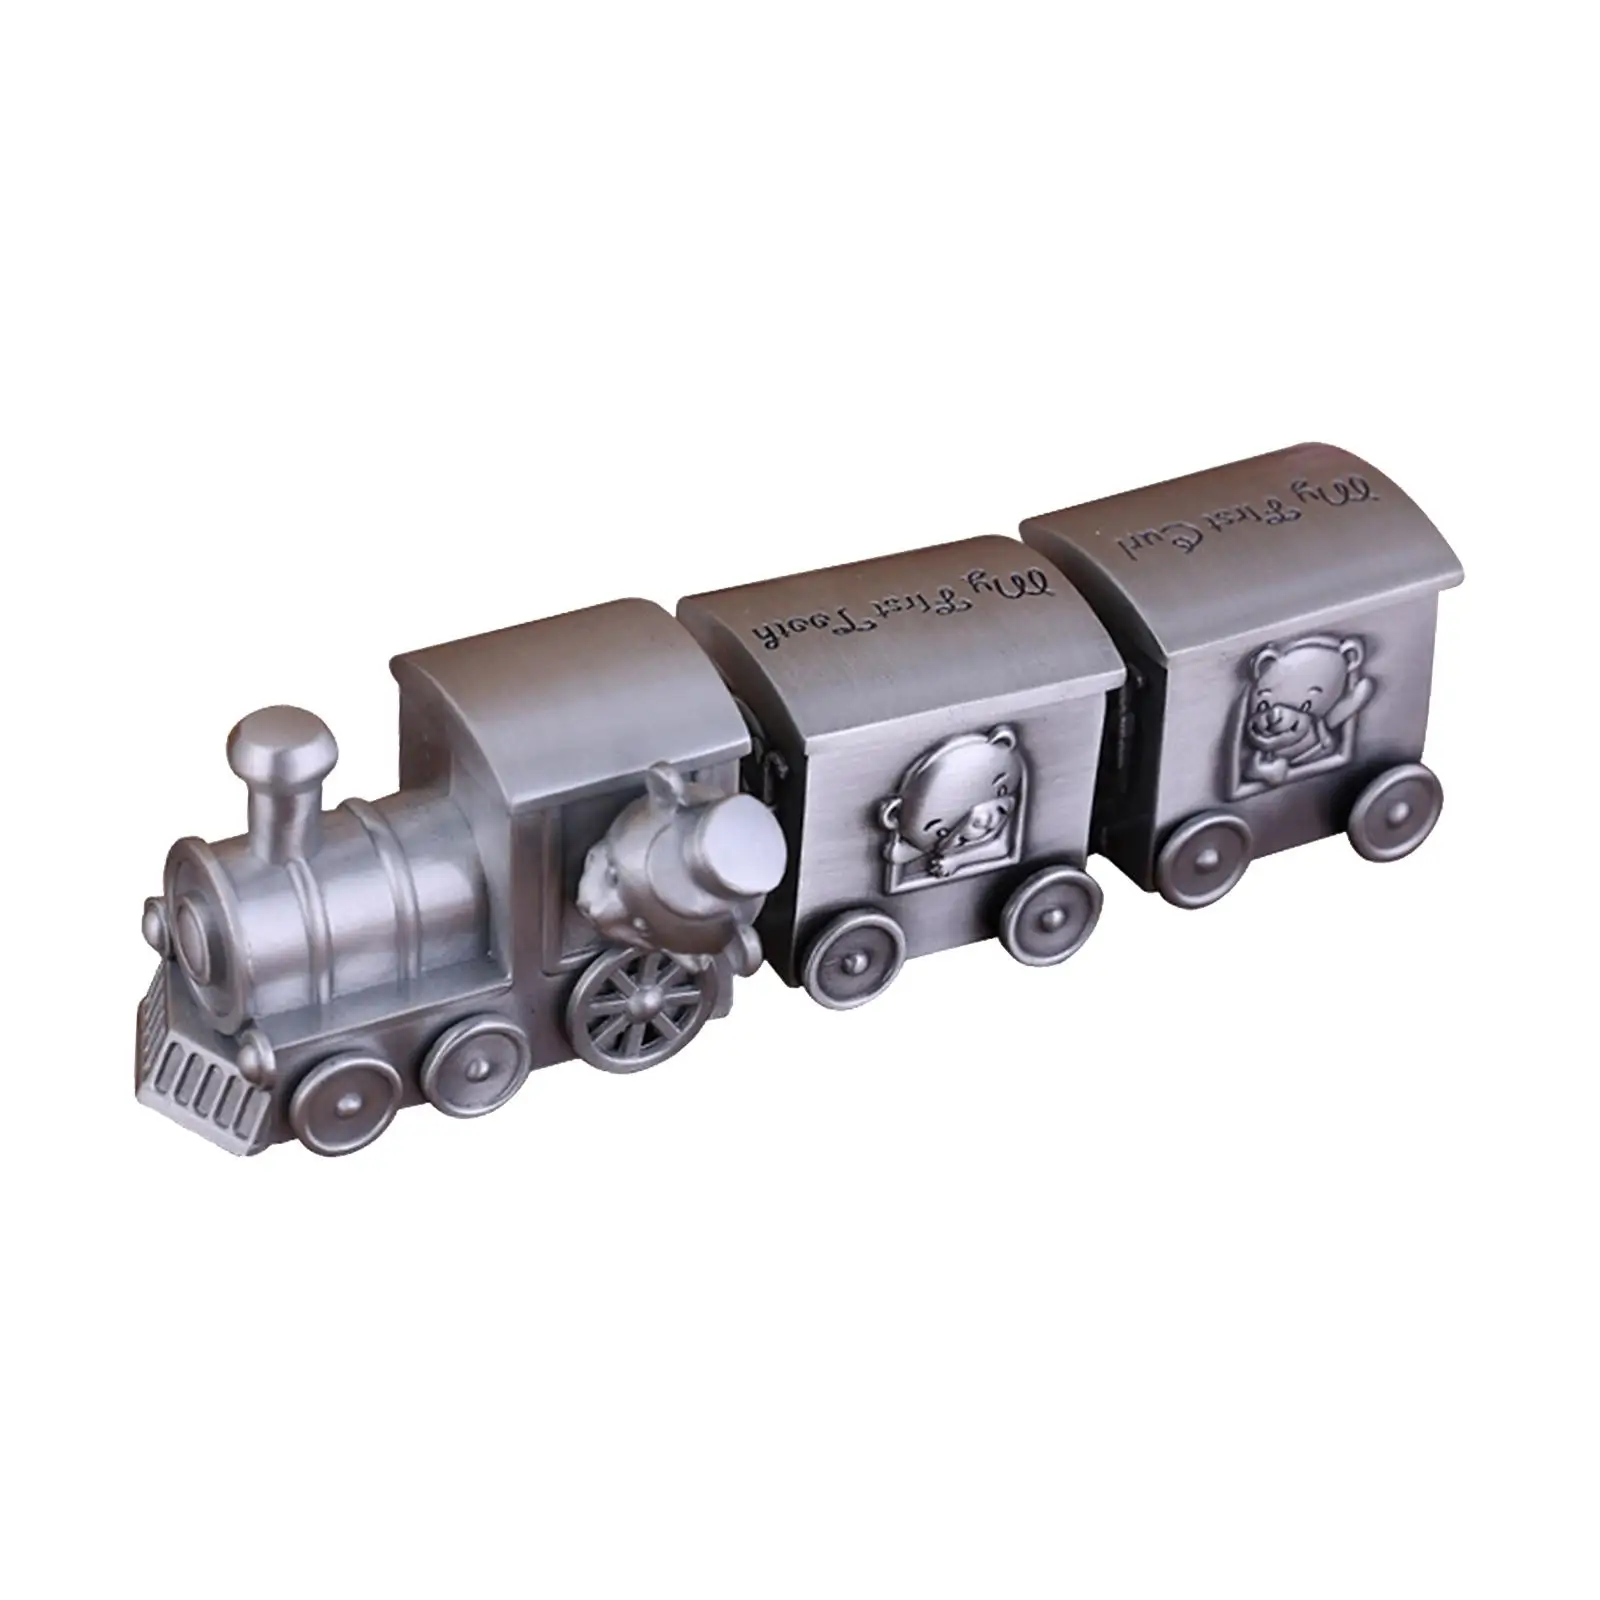 Baby Collections Box Storage Childhood Memory Metal Container Train Tooth Holder for Baby Shower Childhood Souvenir Nusery Decor